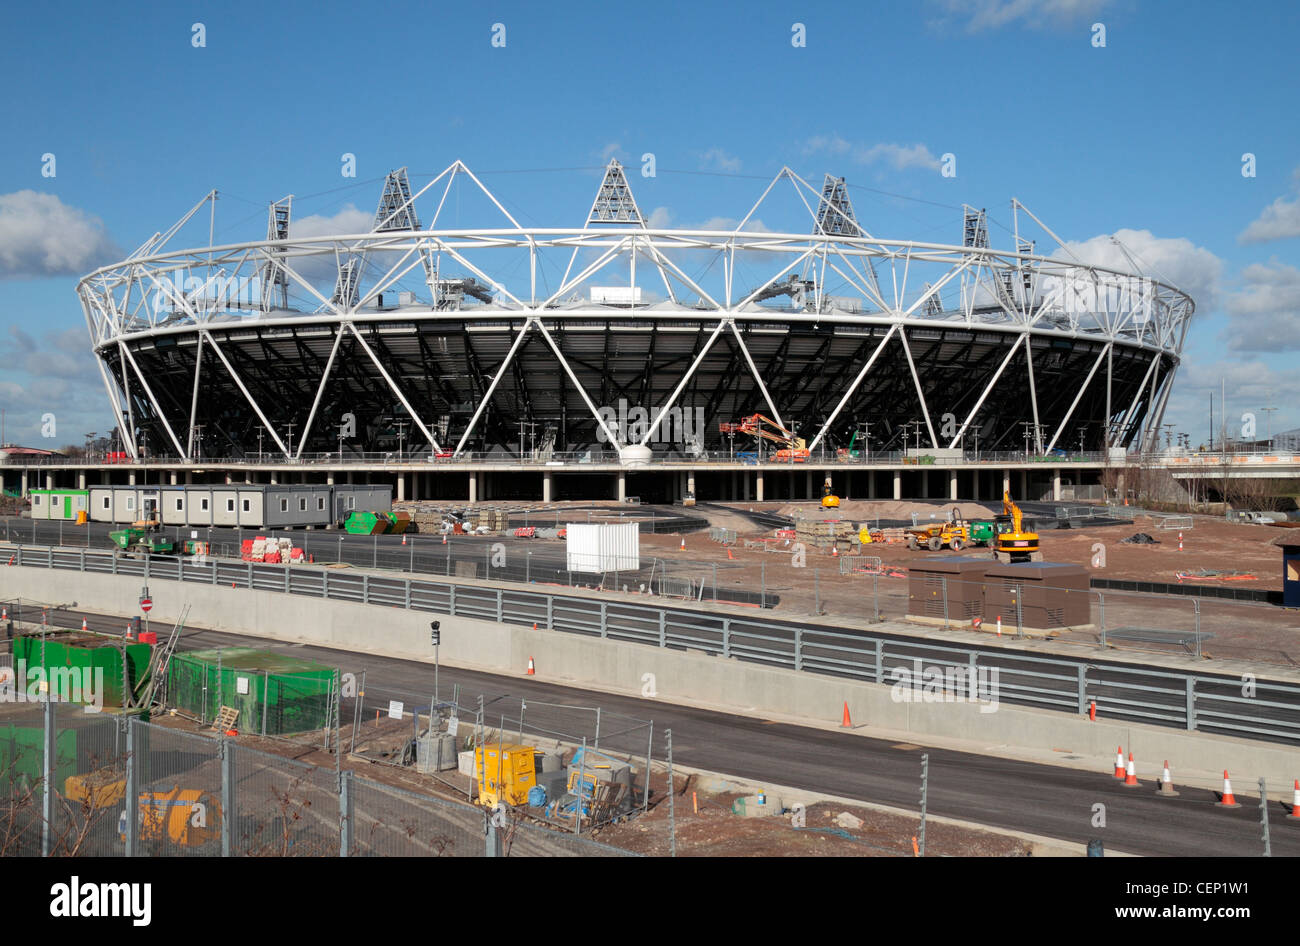 The nearly complete (in Feb 2012) London 2012 Olympic Athletics Stadium in Stratford, London. Stock Photo